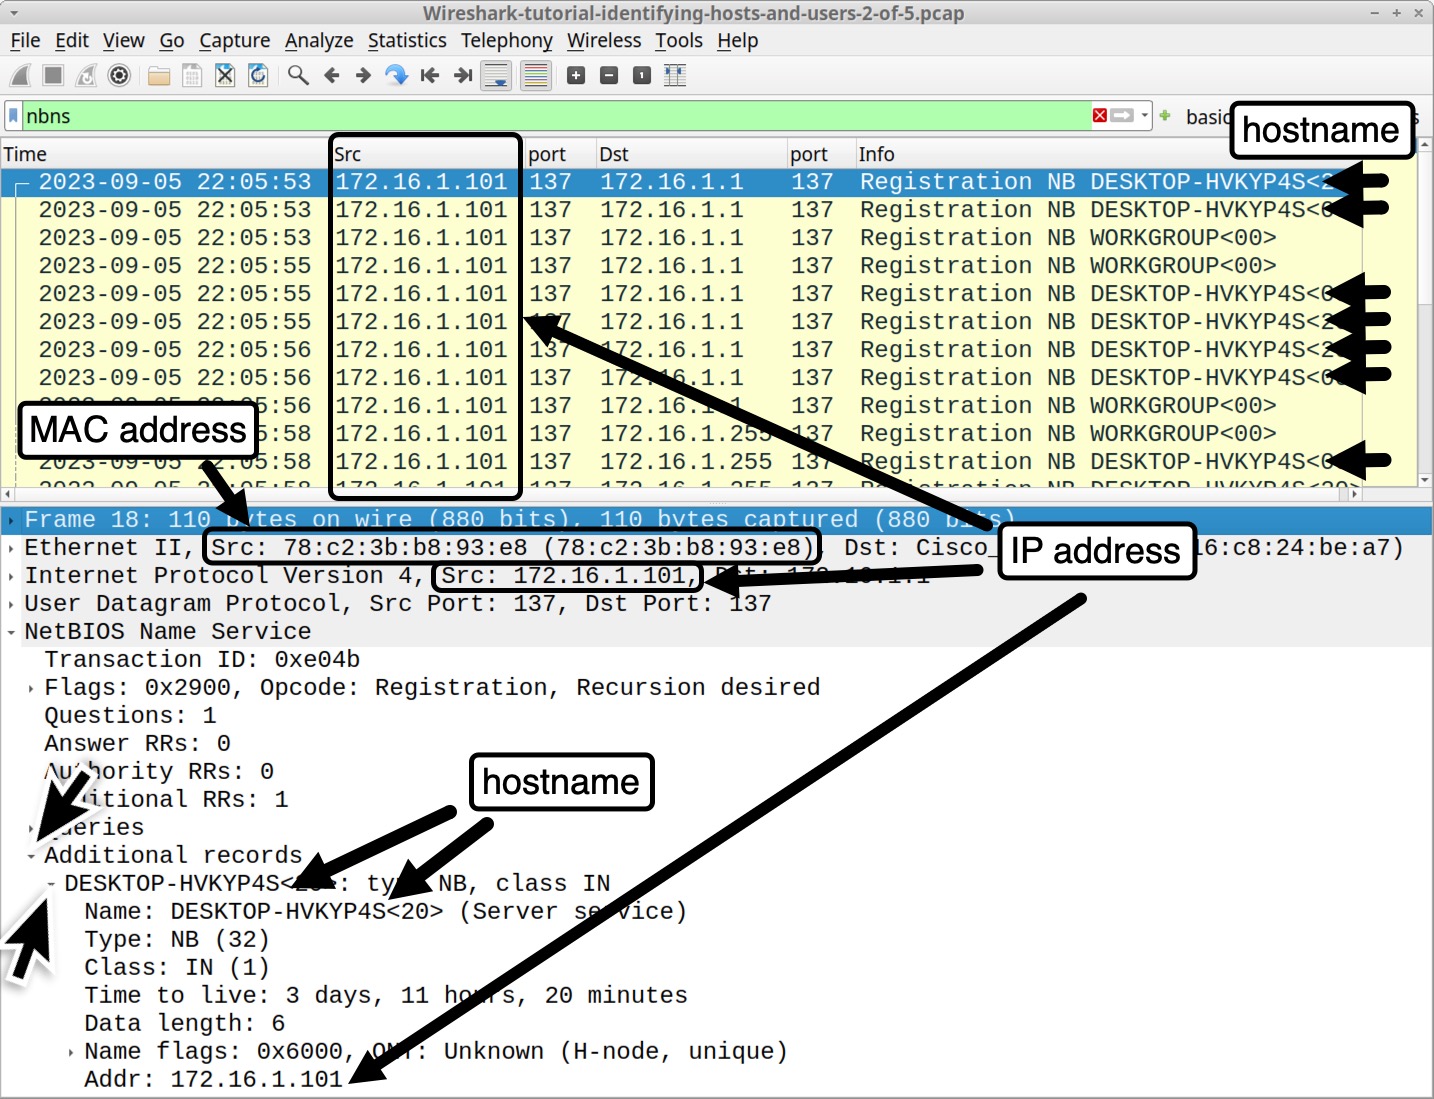 Image 7 is a Wireshark screenshot. The source column is highlight with a black retable. The MAC address is indicated in the lower pane starting with the line Ethernet II. The IP address is indicated in both the Src column and in the lower pane. The host are is also dettifiable under Additional records in the lower pane. 